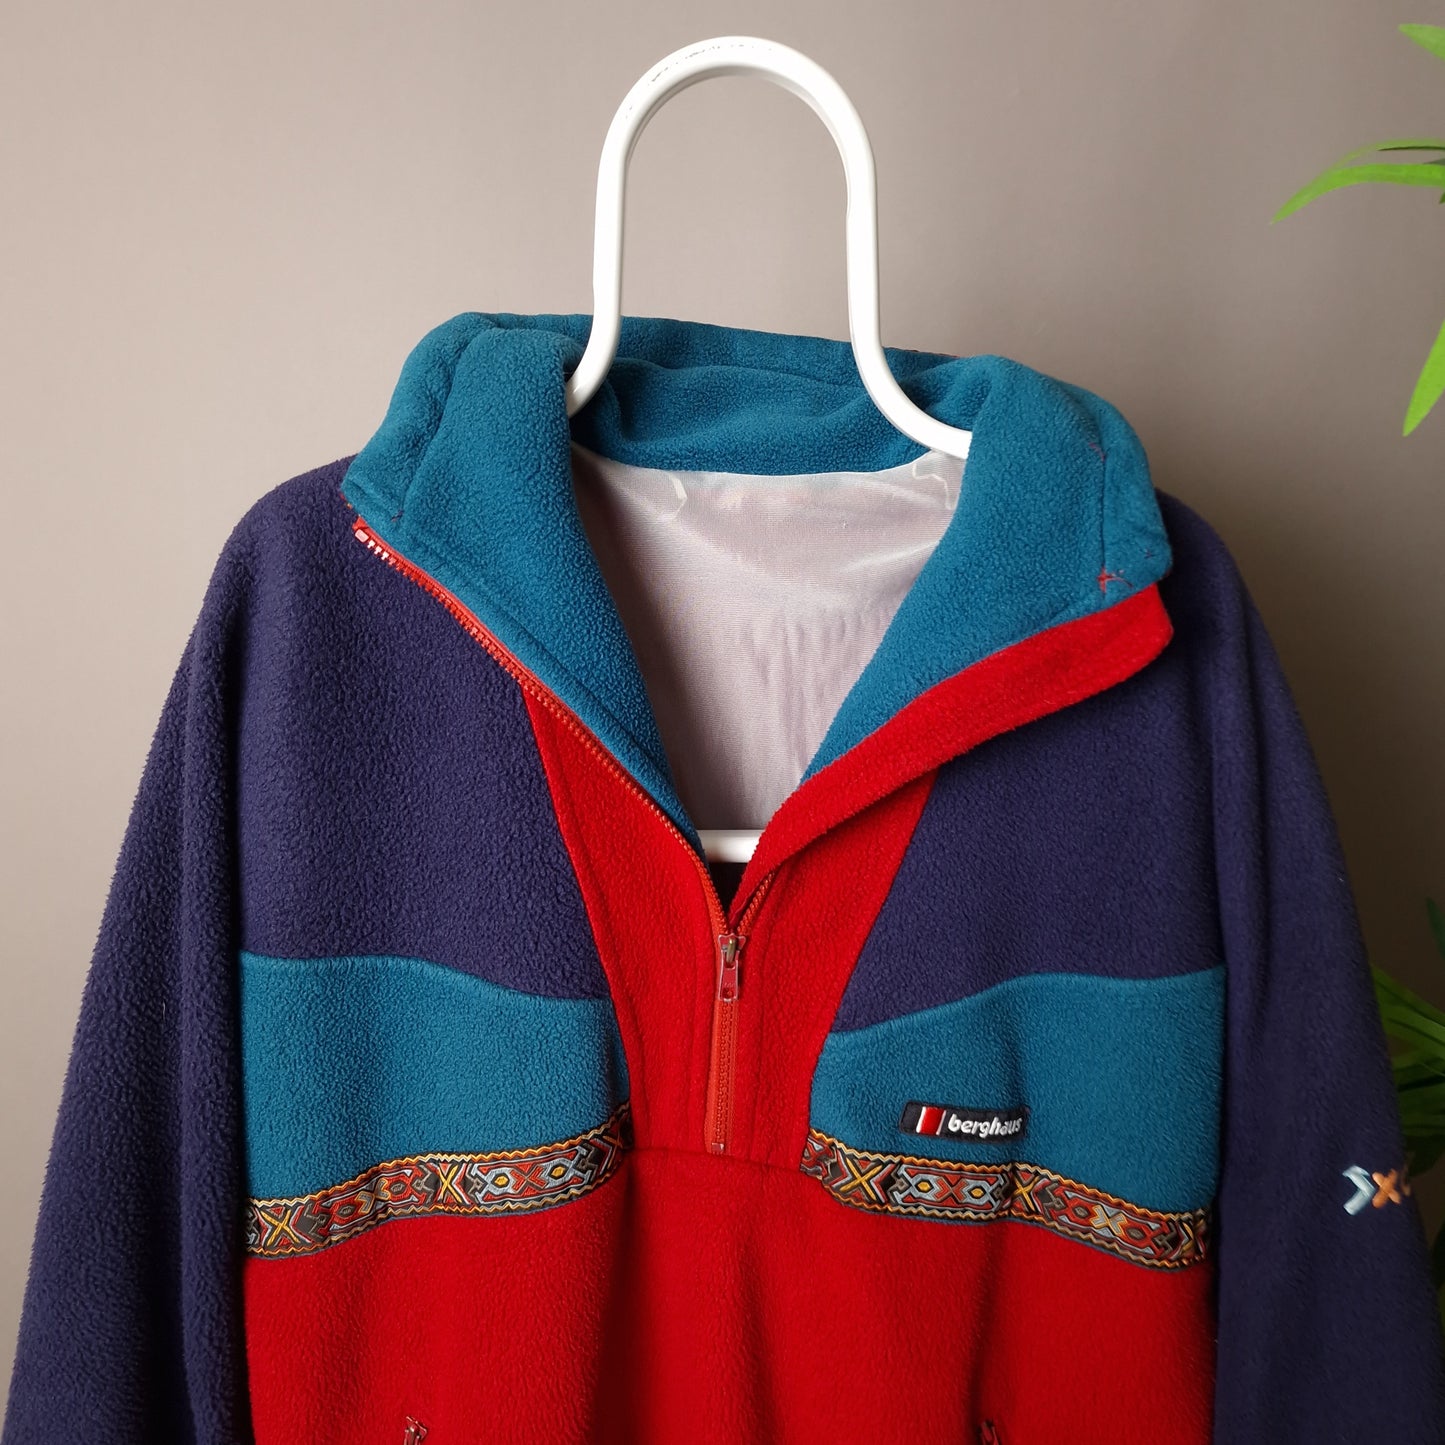 Vintage Berghaus 1/4 zip XTC fleece in red and blue - XL